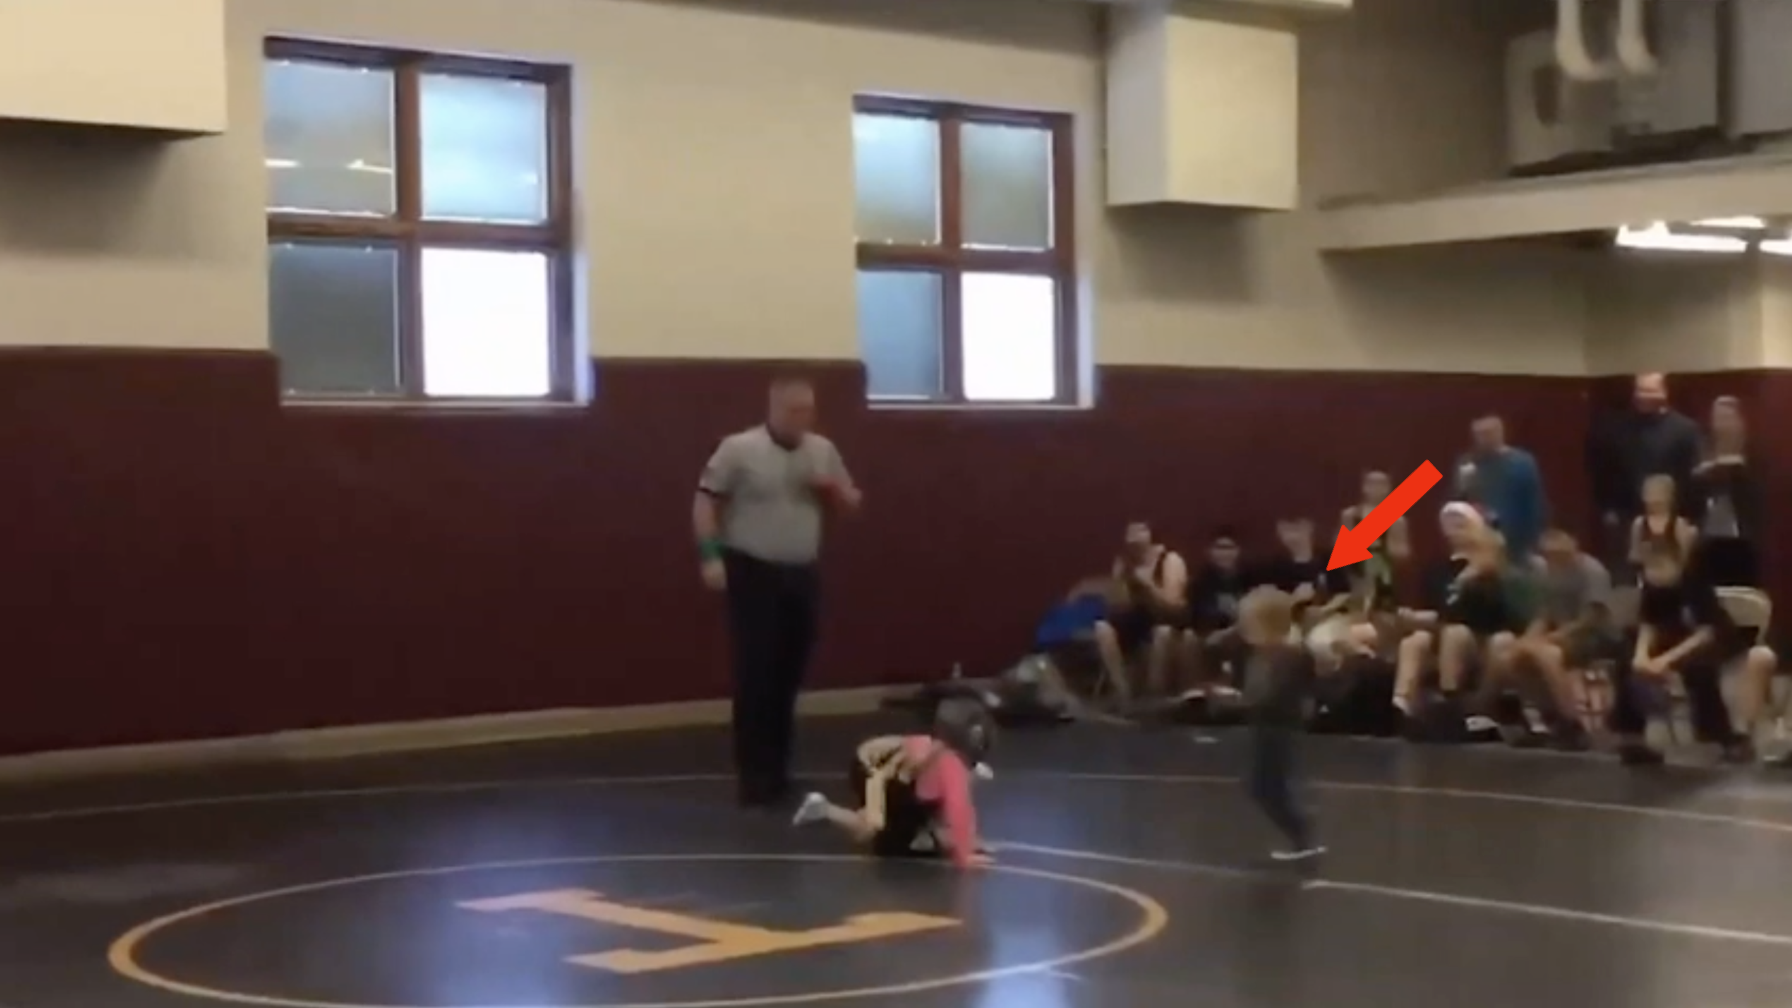 Heroic Little Boy Tries To Rescue Big Sister From Wrestling Opponent